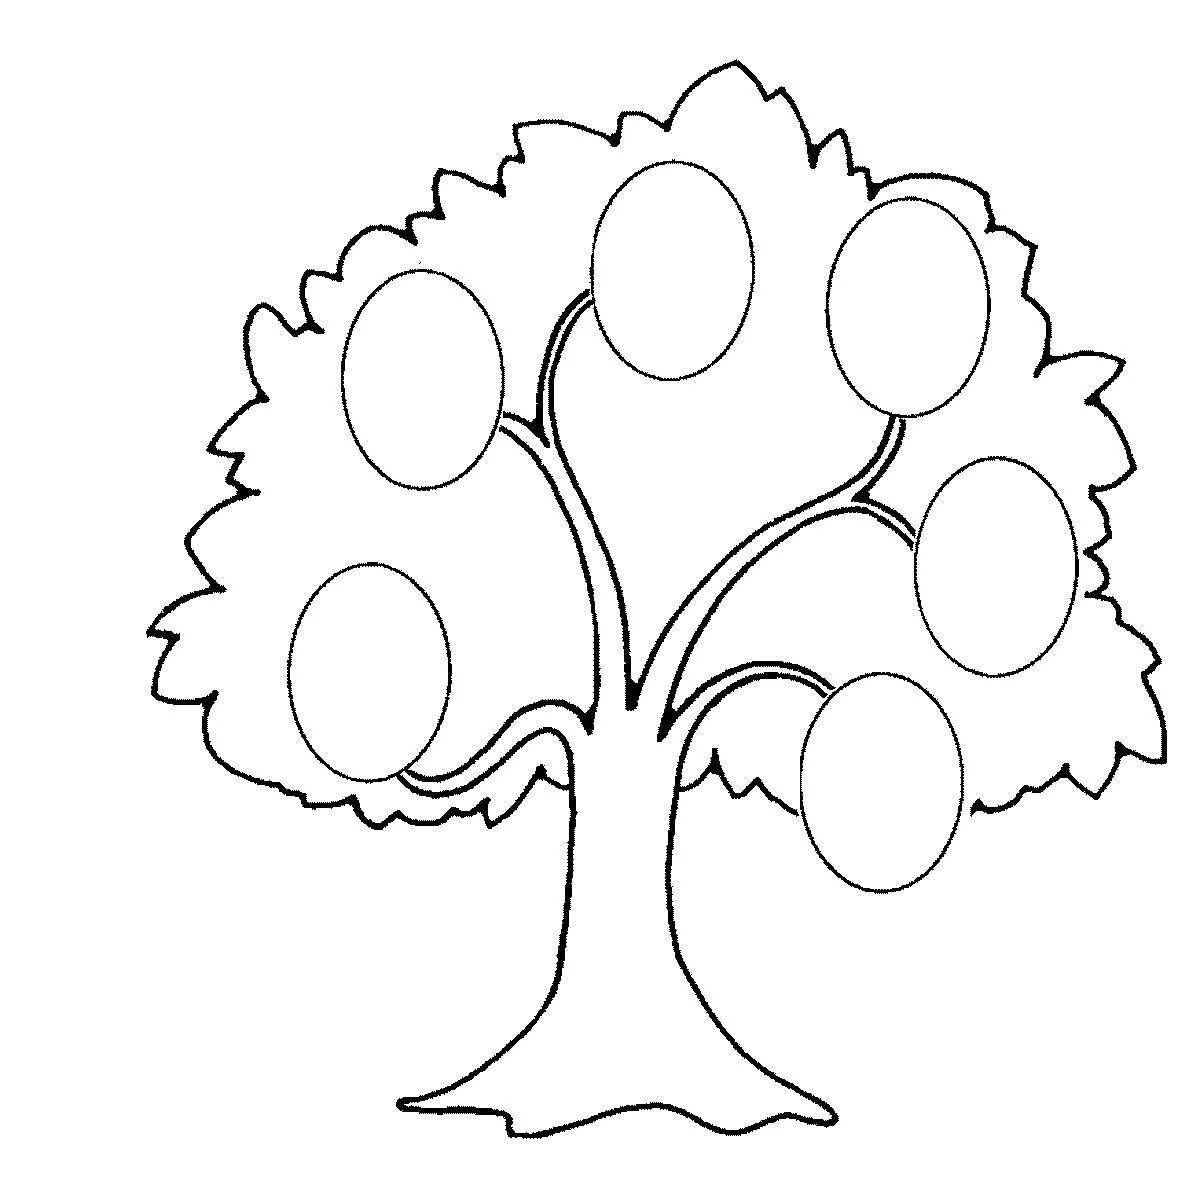 Attractive family tree template for kids